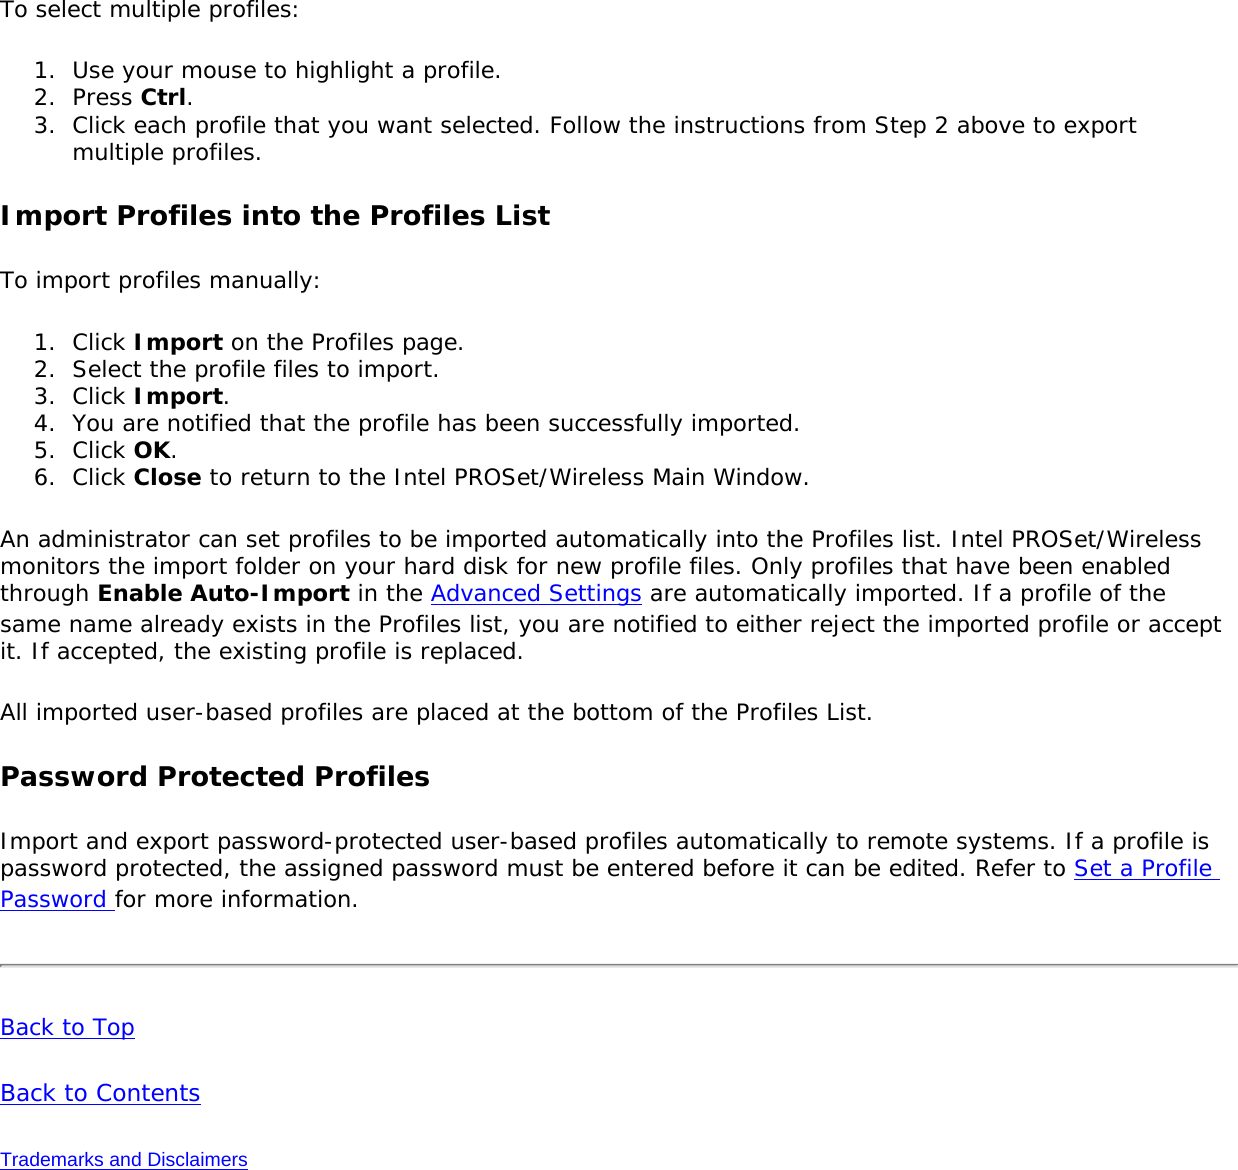 To select multiple profiles: 1.  Use your mouse to highlight a profile.2.  Press Ctrl.3.  Click each profile that you want selected. Follow the instructions from Step 2 above to export multiple profiles. Import Profiles into the Profiles ListTo import profiles manually: 1.  Click Import on the Profiles page.2.  Select the profile files to import.3.  Click Import.4.  You are notified that the profile has been successfully imported.5.  Click OK. 6.  Click Close to return to the Intel PROSet/Wireless Main Window. An administrator can set profiles to be imported automatically into the Profiles list. Intel PROSet/Wireless monitors the import folder on your hard disk for new profile files. Only profiles that have been enabled through Enable Auto-Import in the Advanced Settings are automatically imported. If a profile of the same name already exists in the Profiles list, you are notified to either reject the imported profile or accept it. If accepted, the existing profile is replaced. All imported user-based profiles are placed at the bottom of the Profiles List. Password Protected ProfilesImport and export password-protected user-based profiles automatically to remote systems. If a profile is password protected, the assigned password must be entered before it can be edited. Refer to Set a Profile Password for more information. Back to Top Back to Contents Trademarks and Disclaimers 